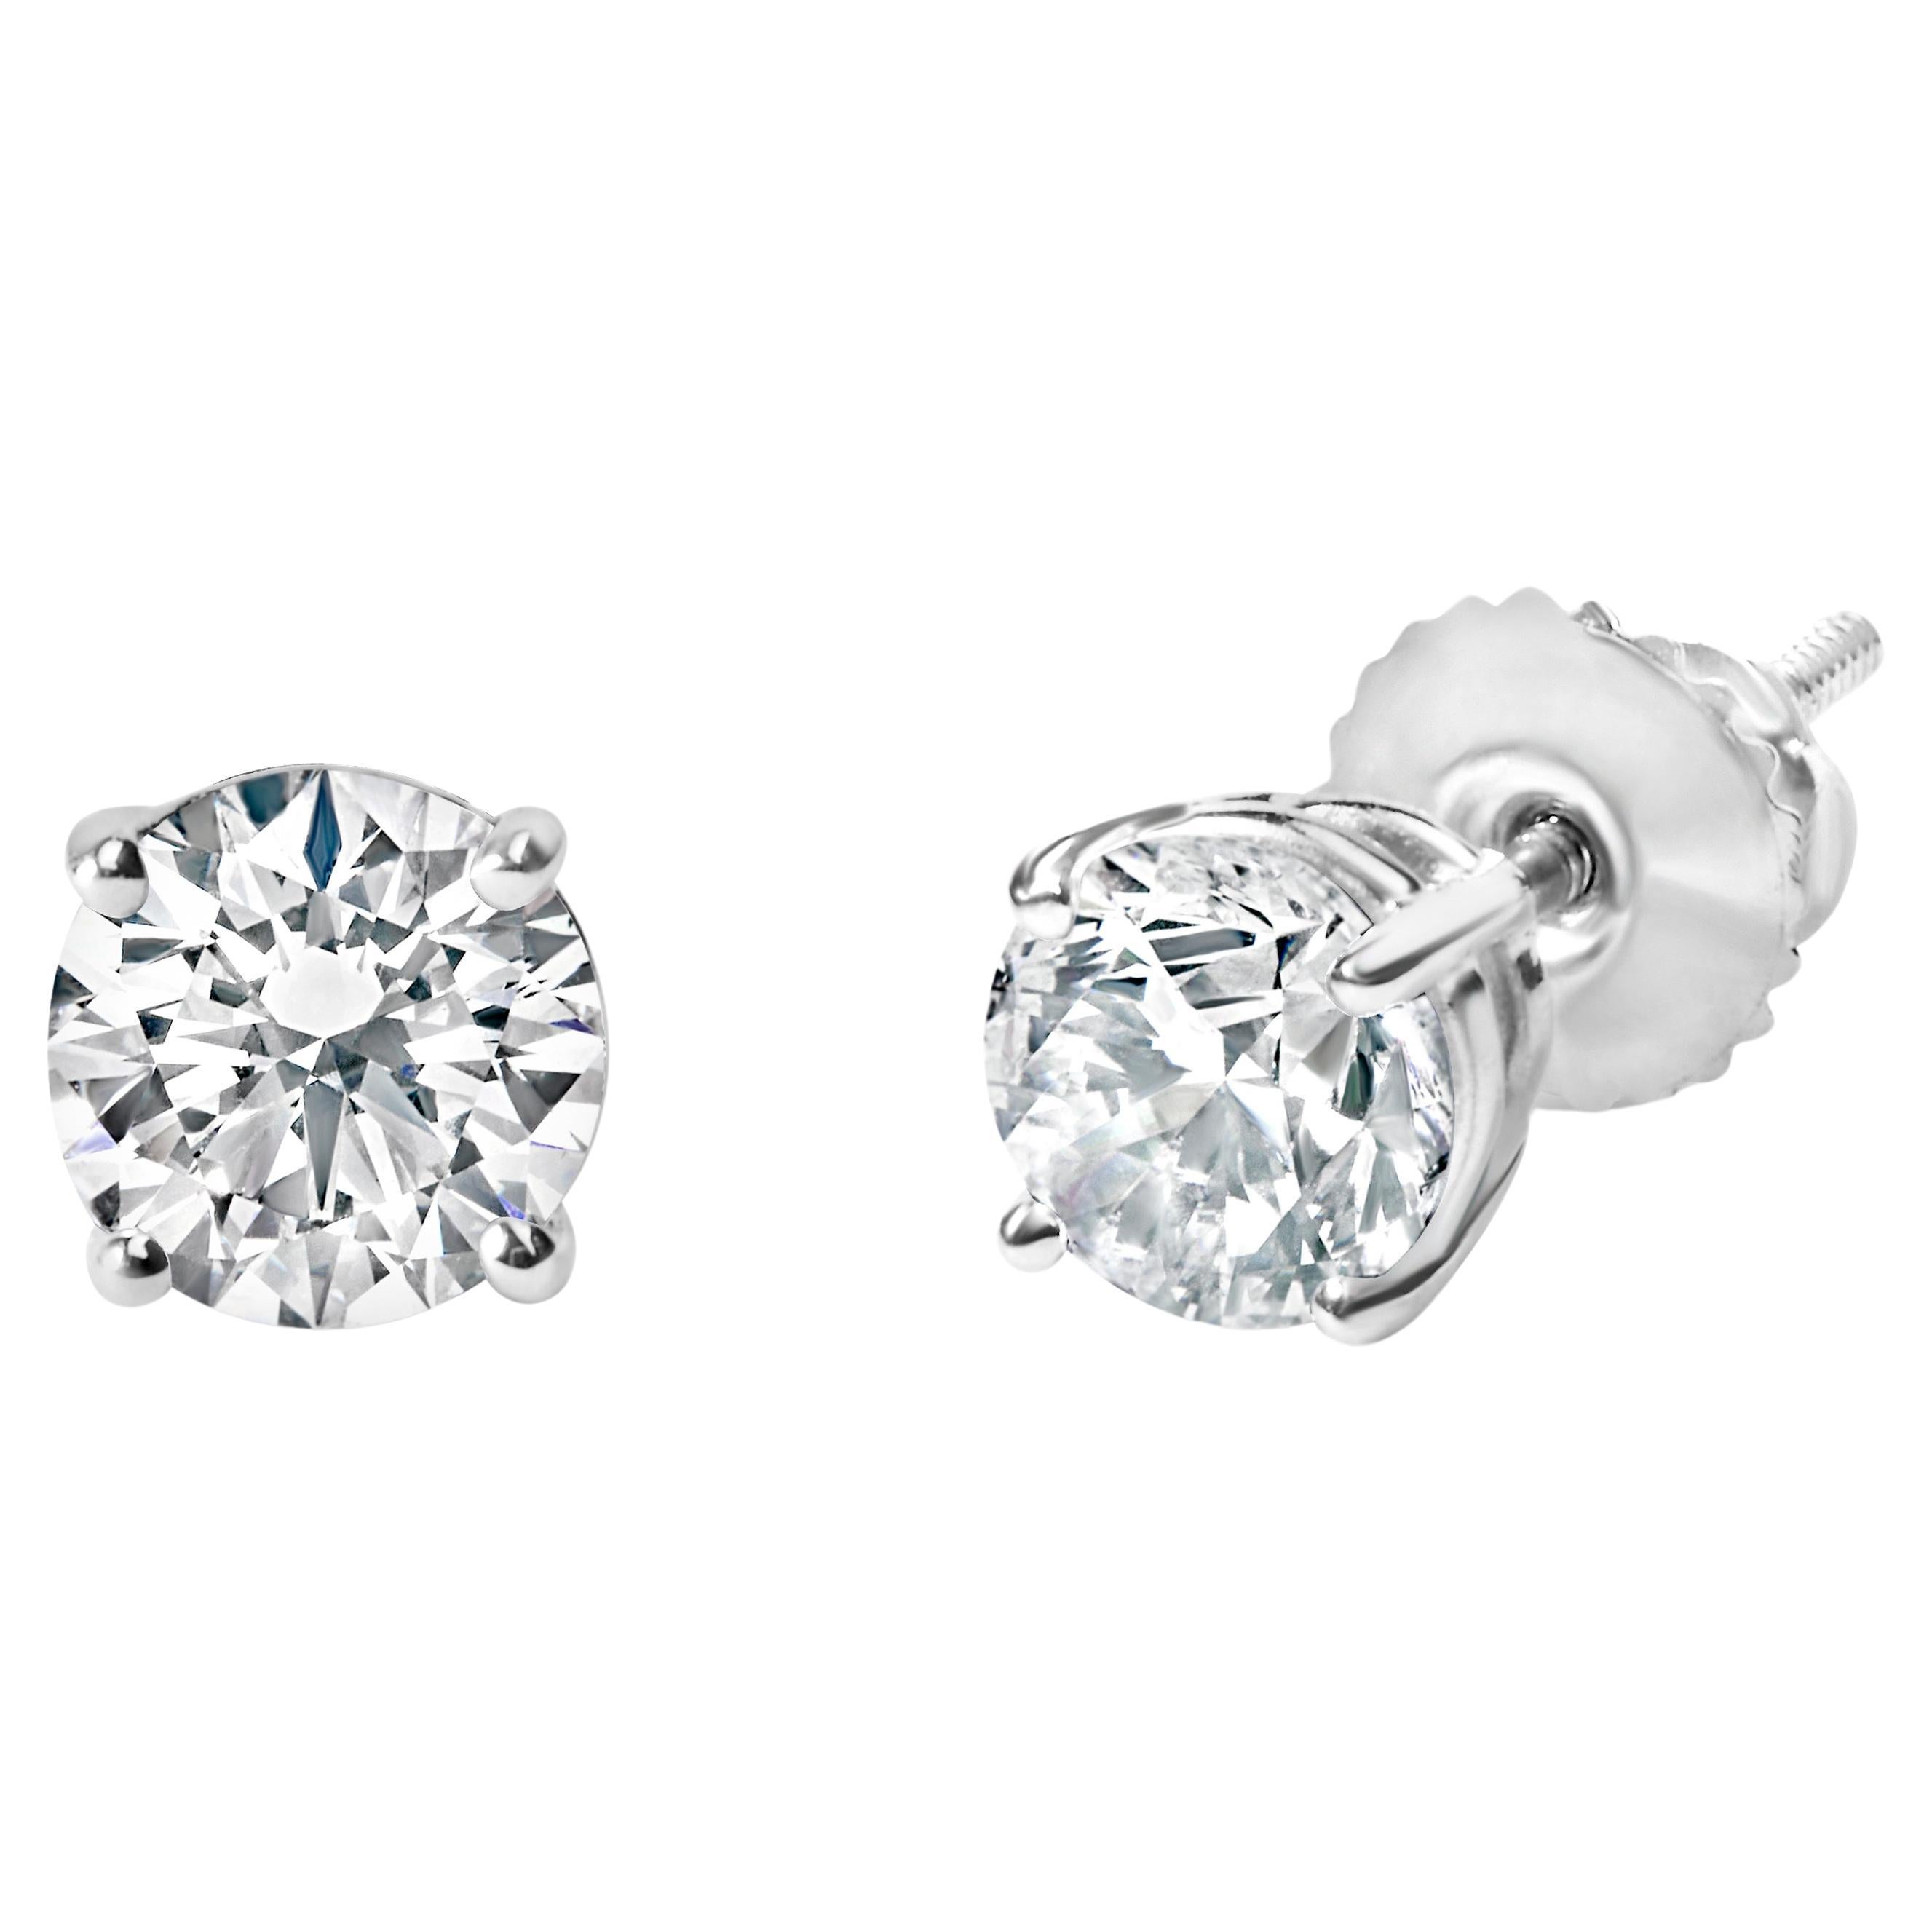 IGI Certified 14K White Gold 1 1/2 Carat Round Diamond Solitaire Stud Earrings For Sale